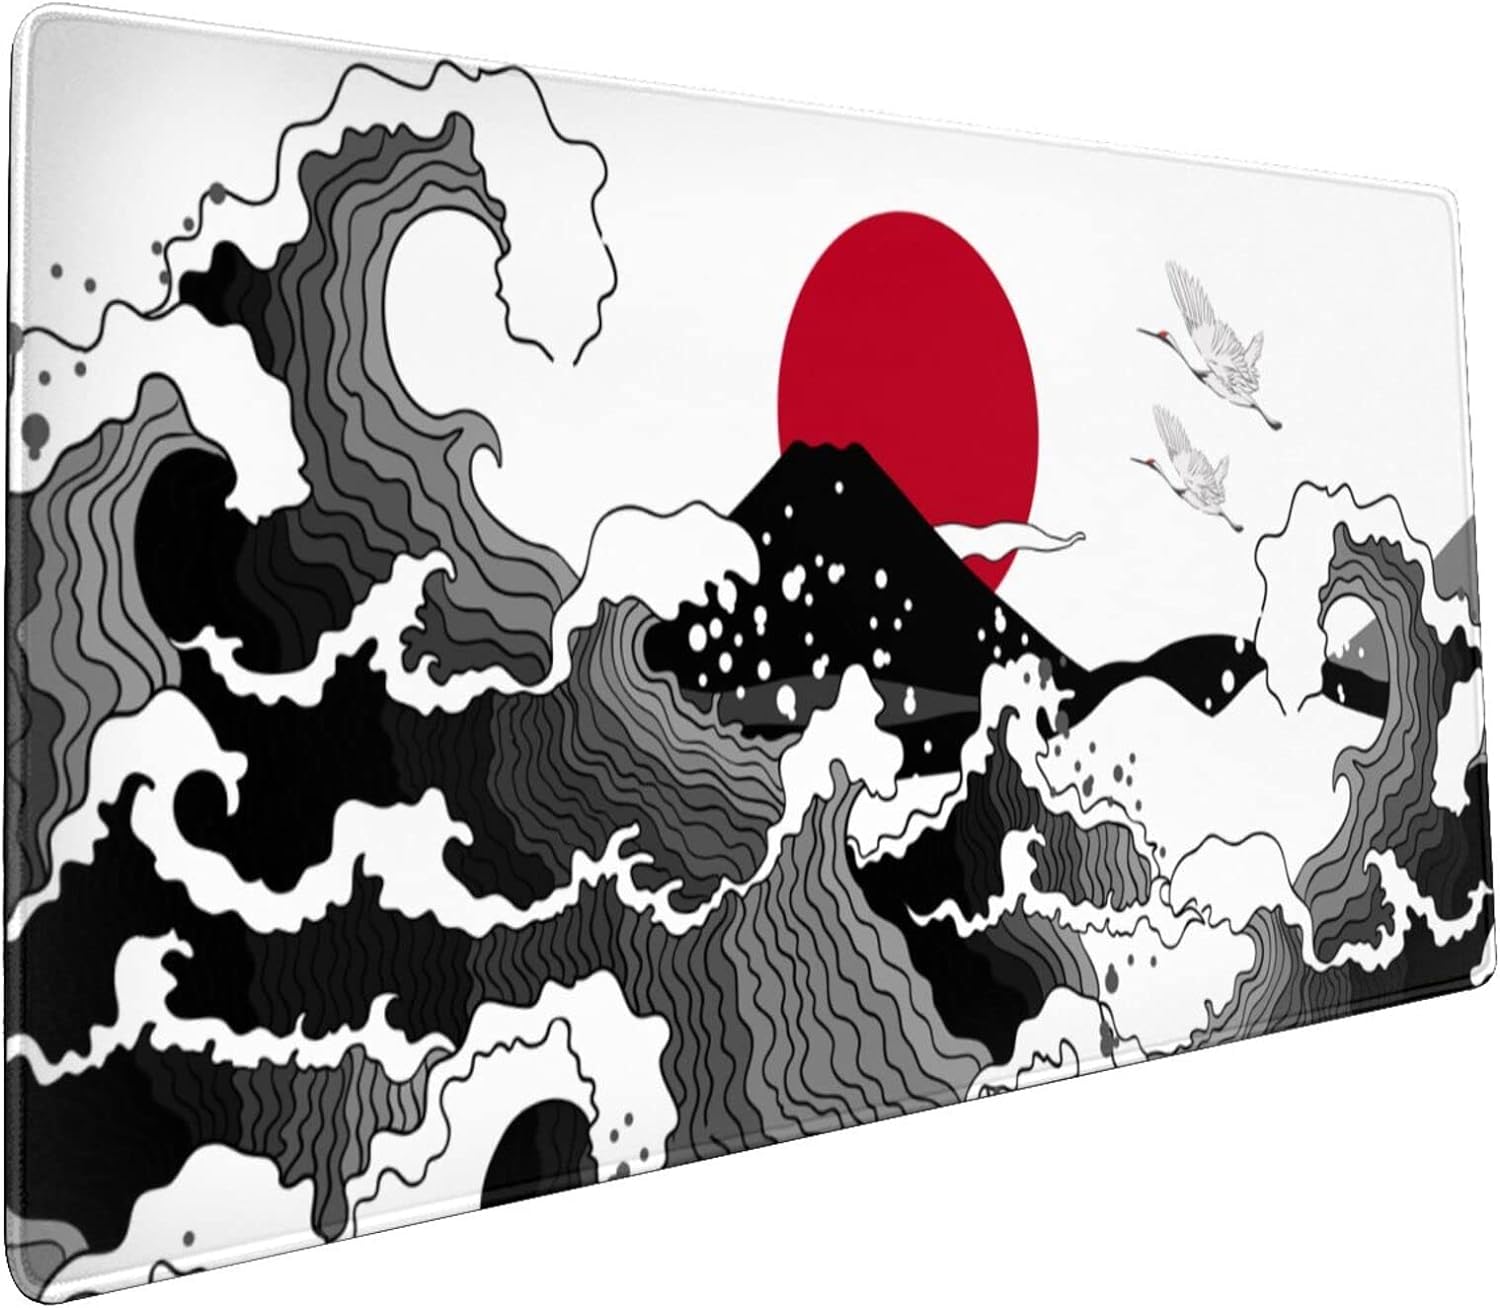 Japanese Red and Black Wave Mouse Pad 35.4 X 15.7 Inch Extended Large Cool Mouse Mat Non-Slip Rubber Base Long Art Mousepad with Stitched Edges Waterproof Desk Pad for Gaming&Home Office,XL